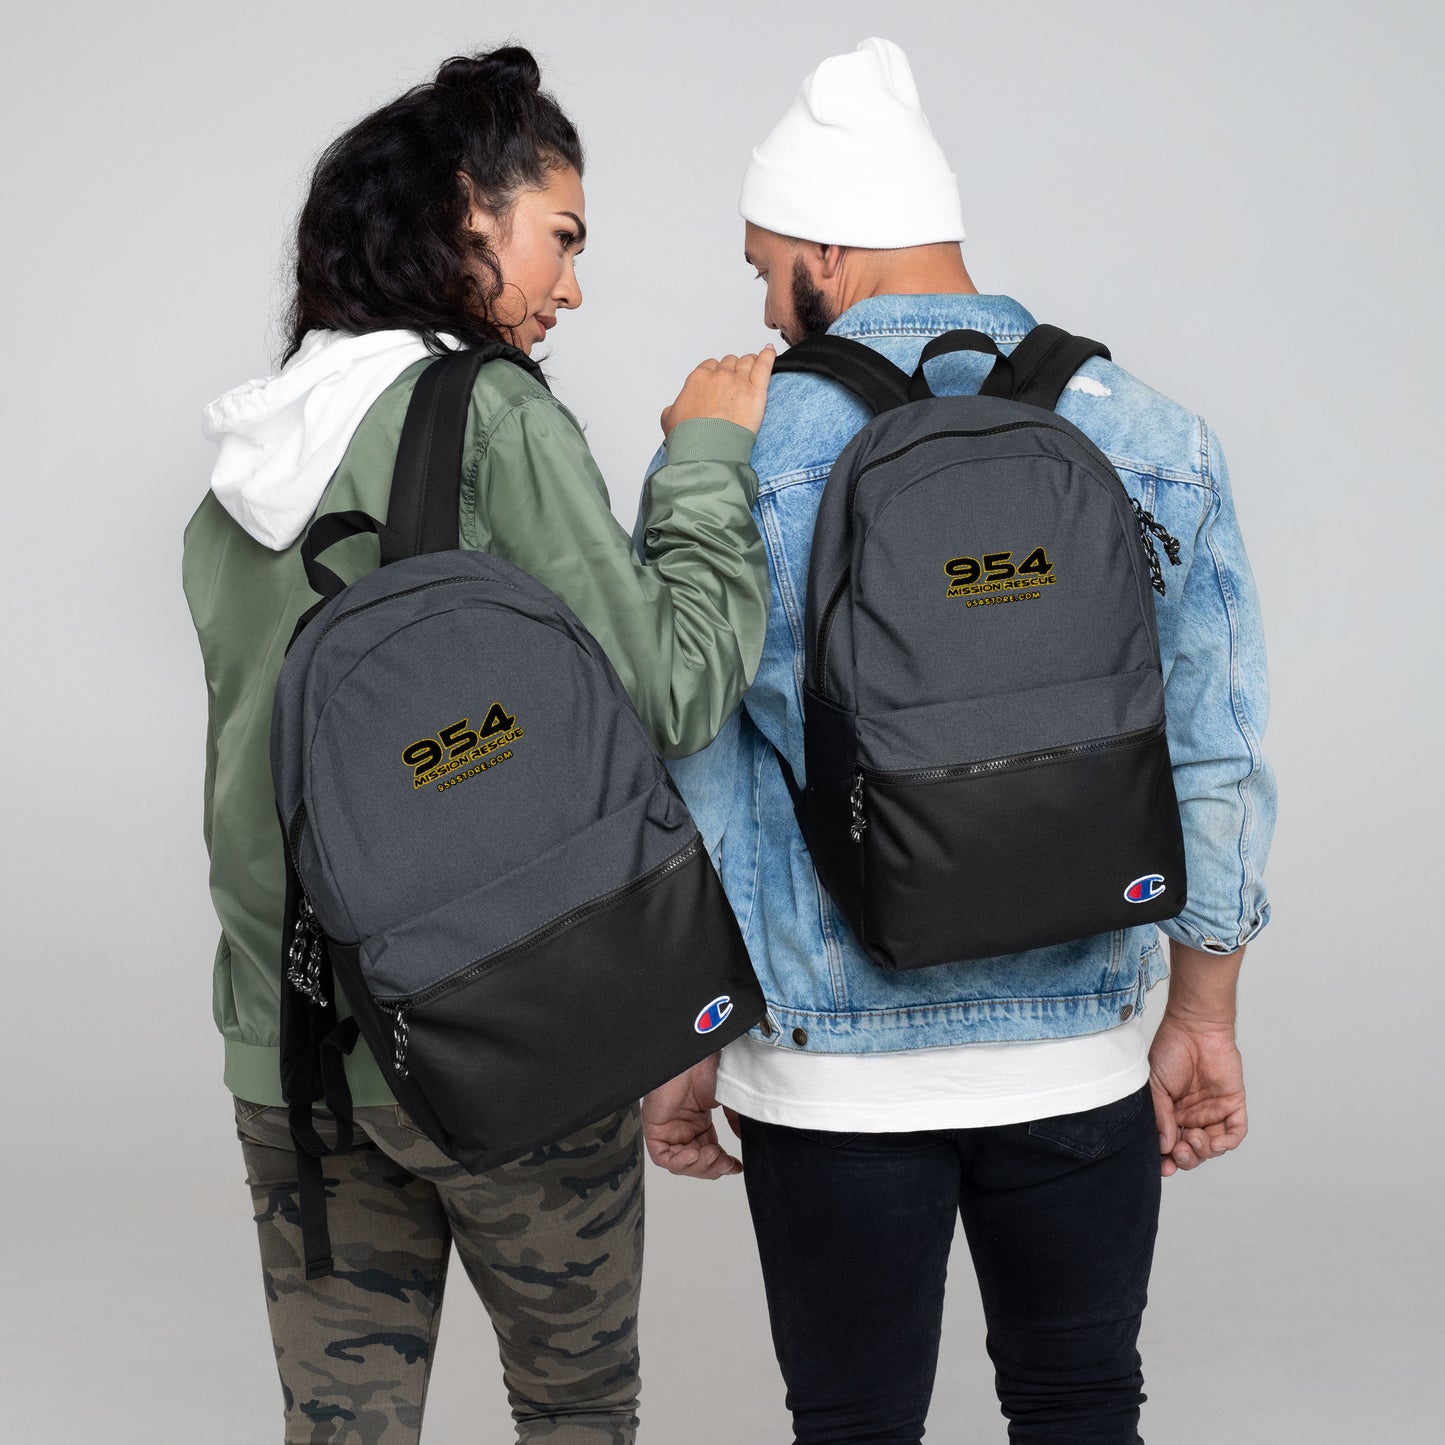 954 MR Embroidered Champion Backpack